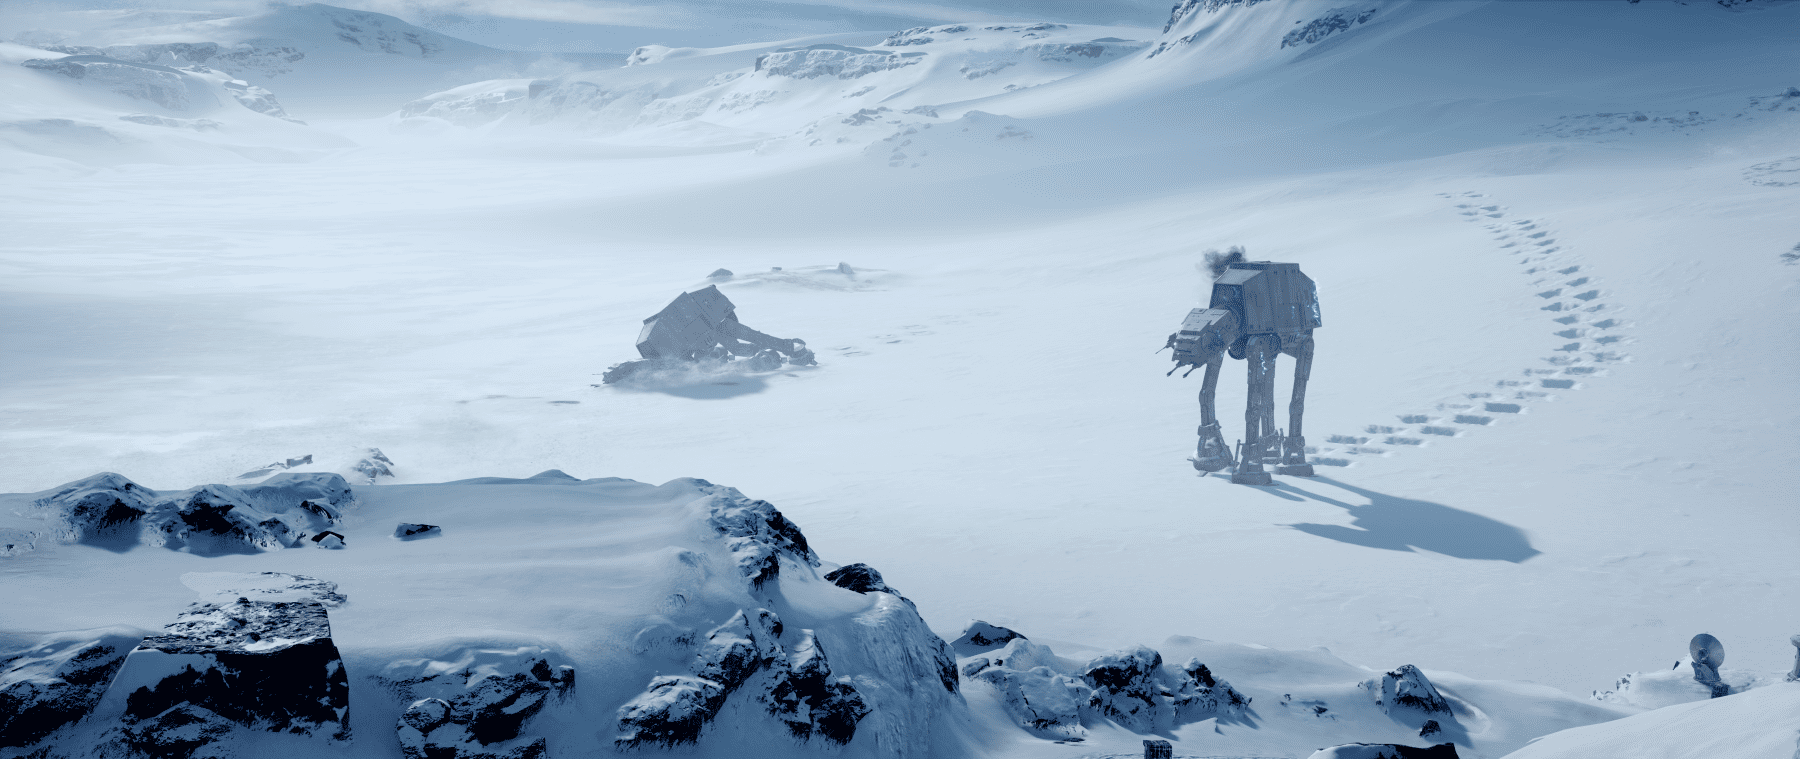 Snow on the planet Hoth